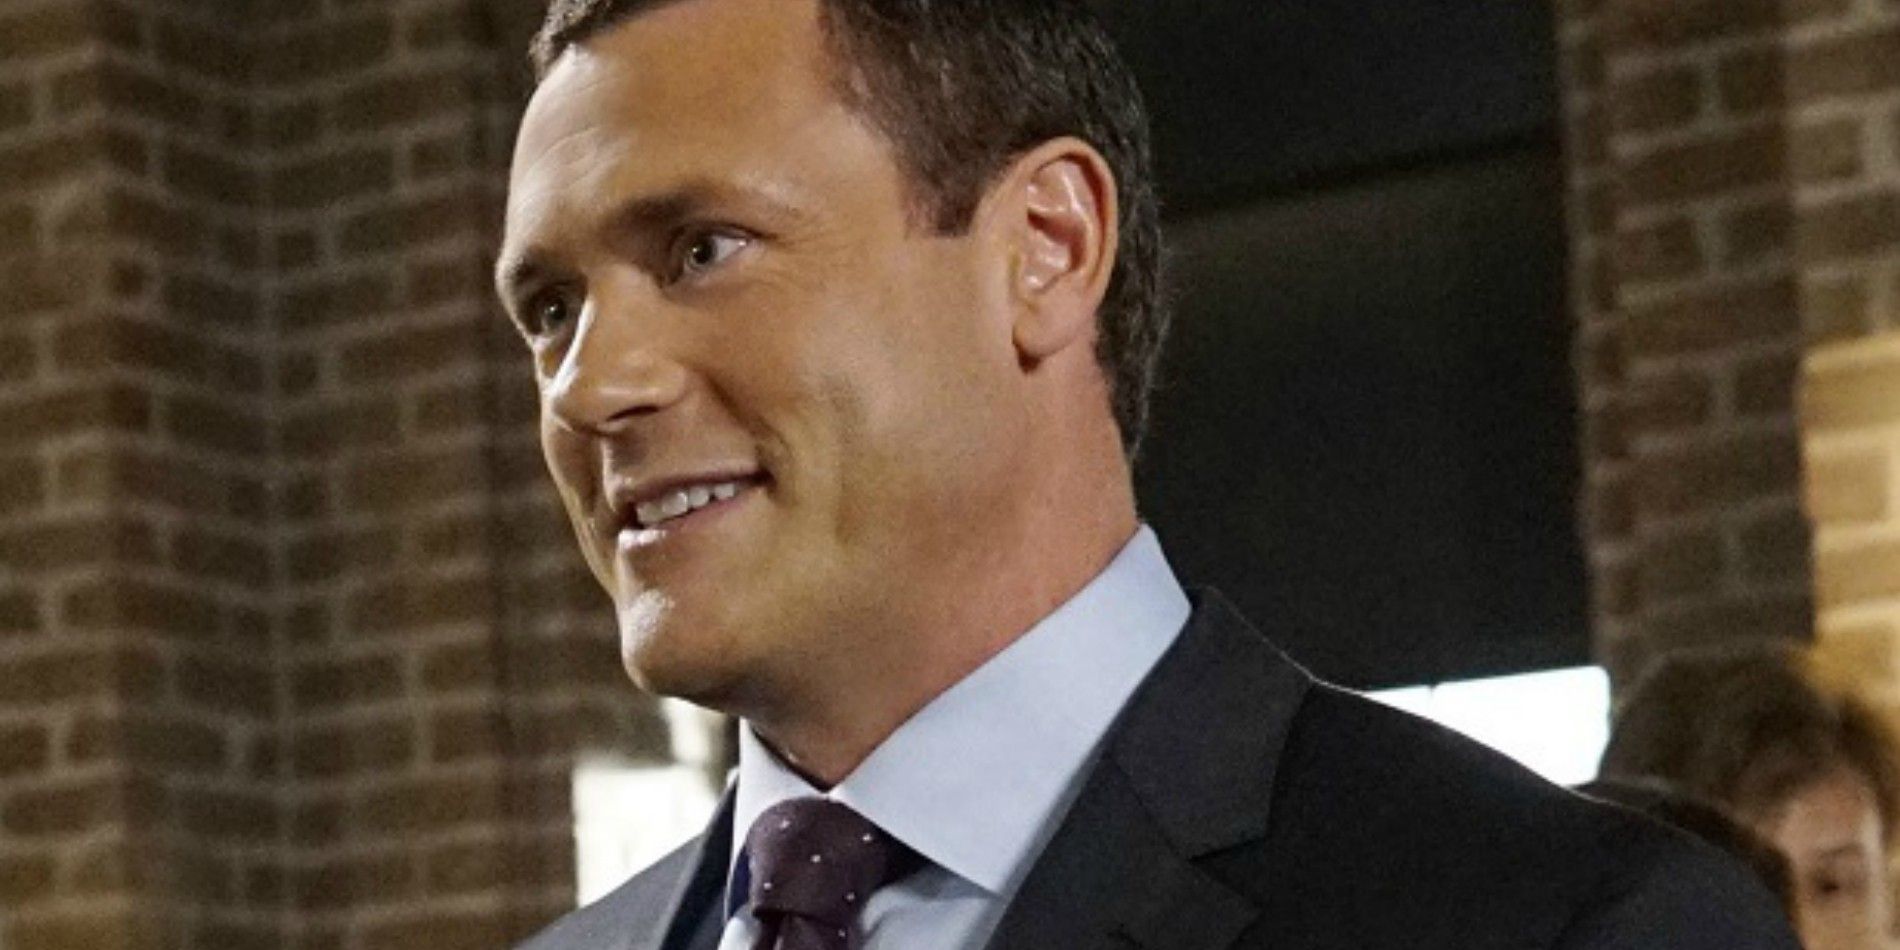 SHIELD director Jeffrey Mace issues directives to his agents in Agents of Shield